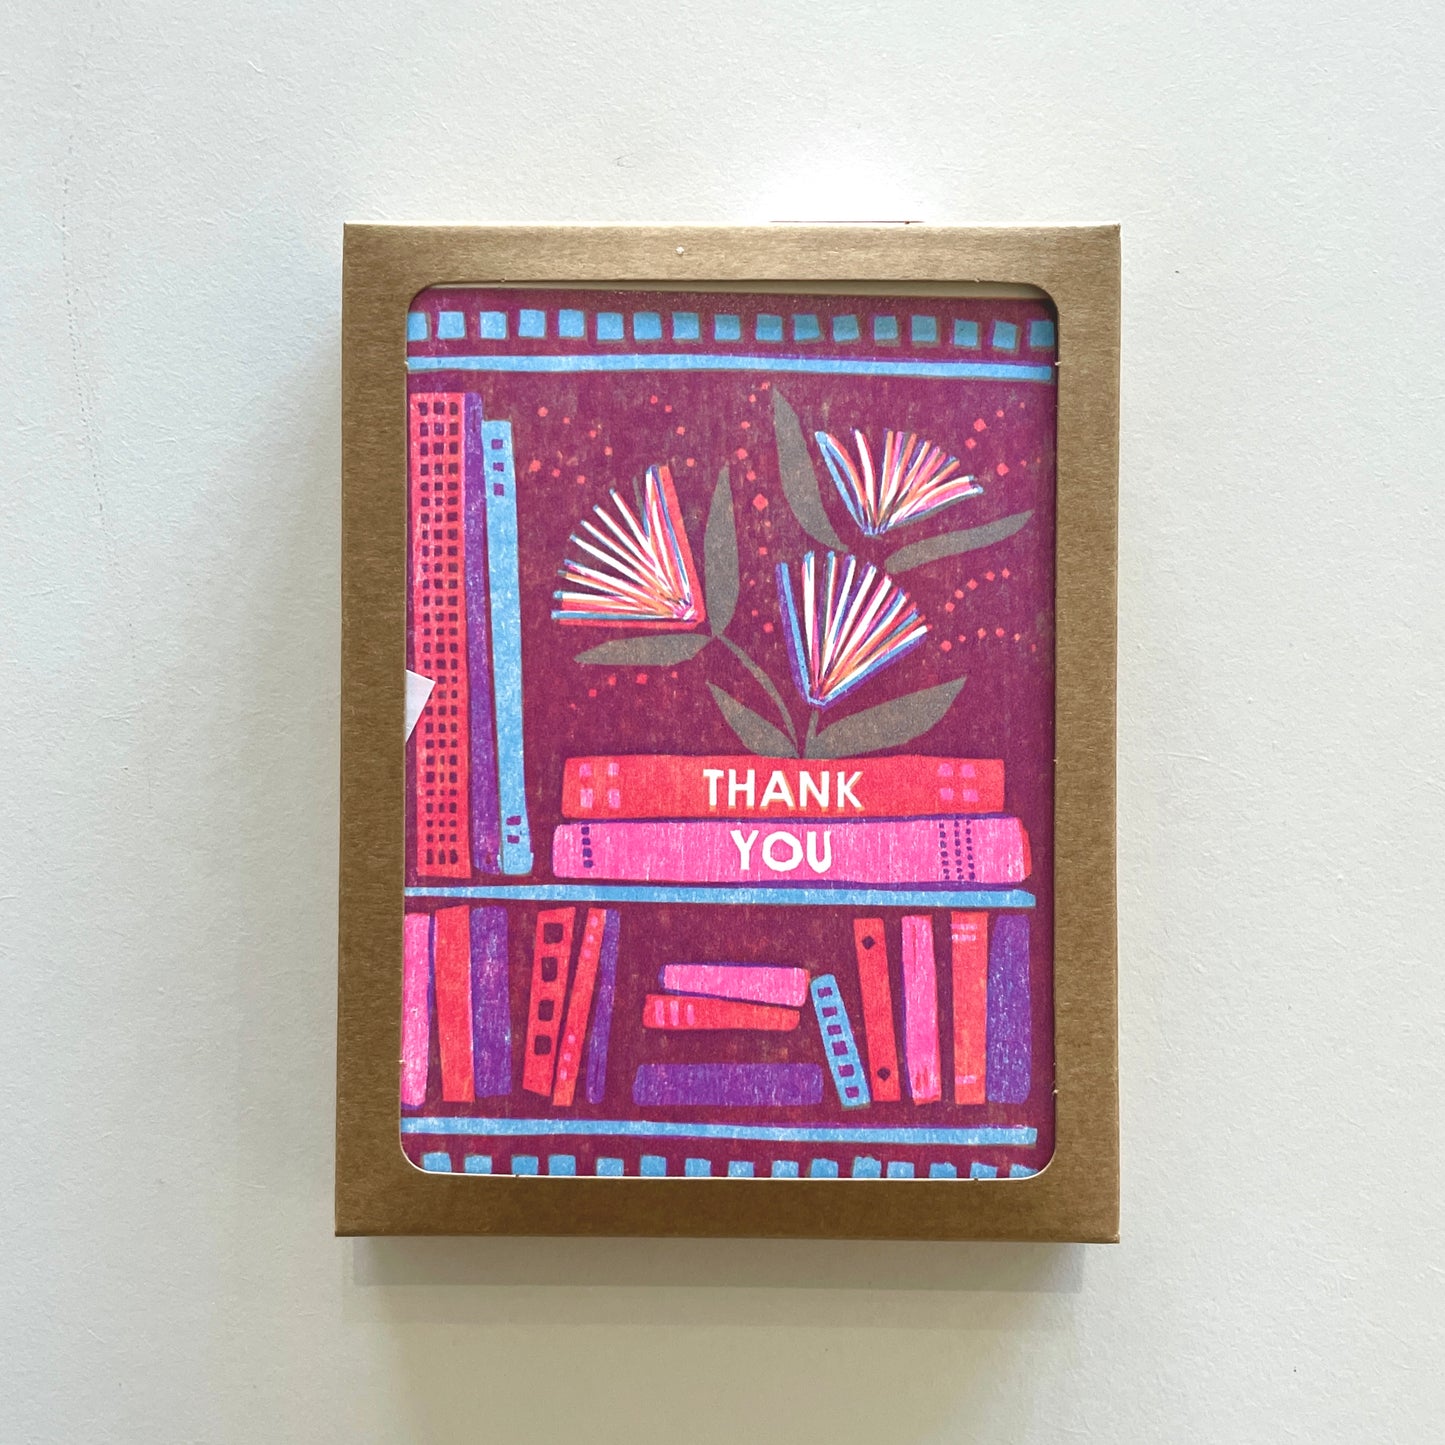 Thank You (Book Flowers) Gratitude Card - Boxed Set of 6